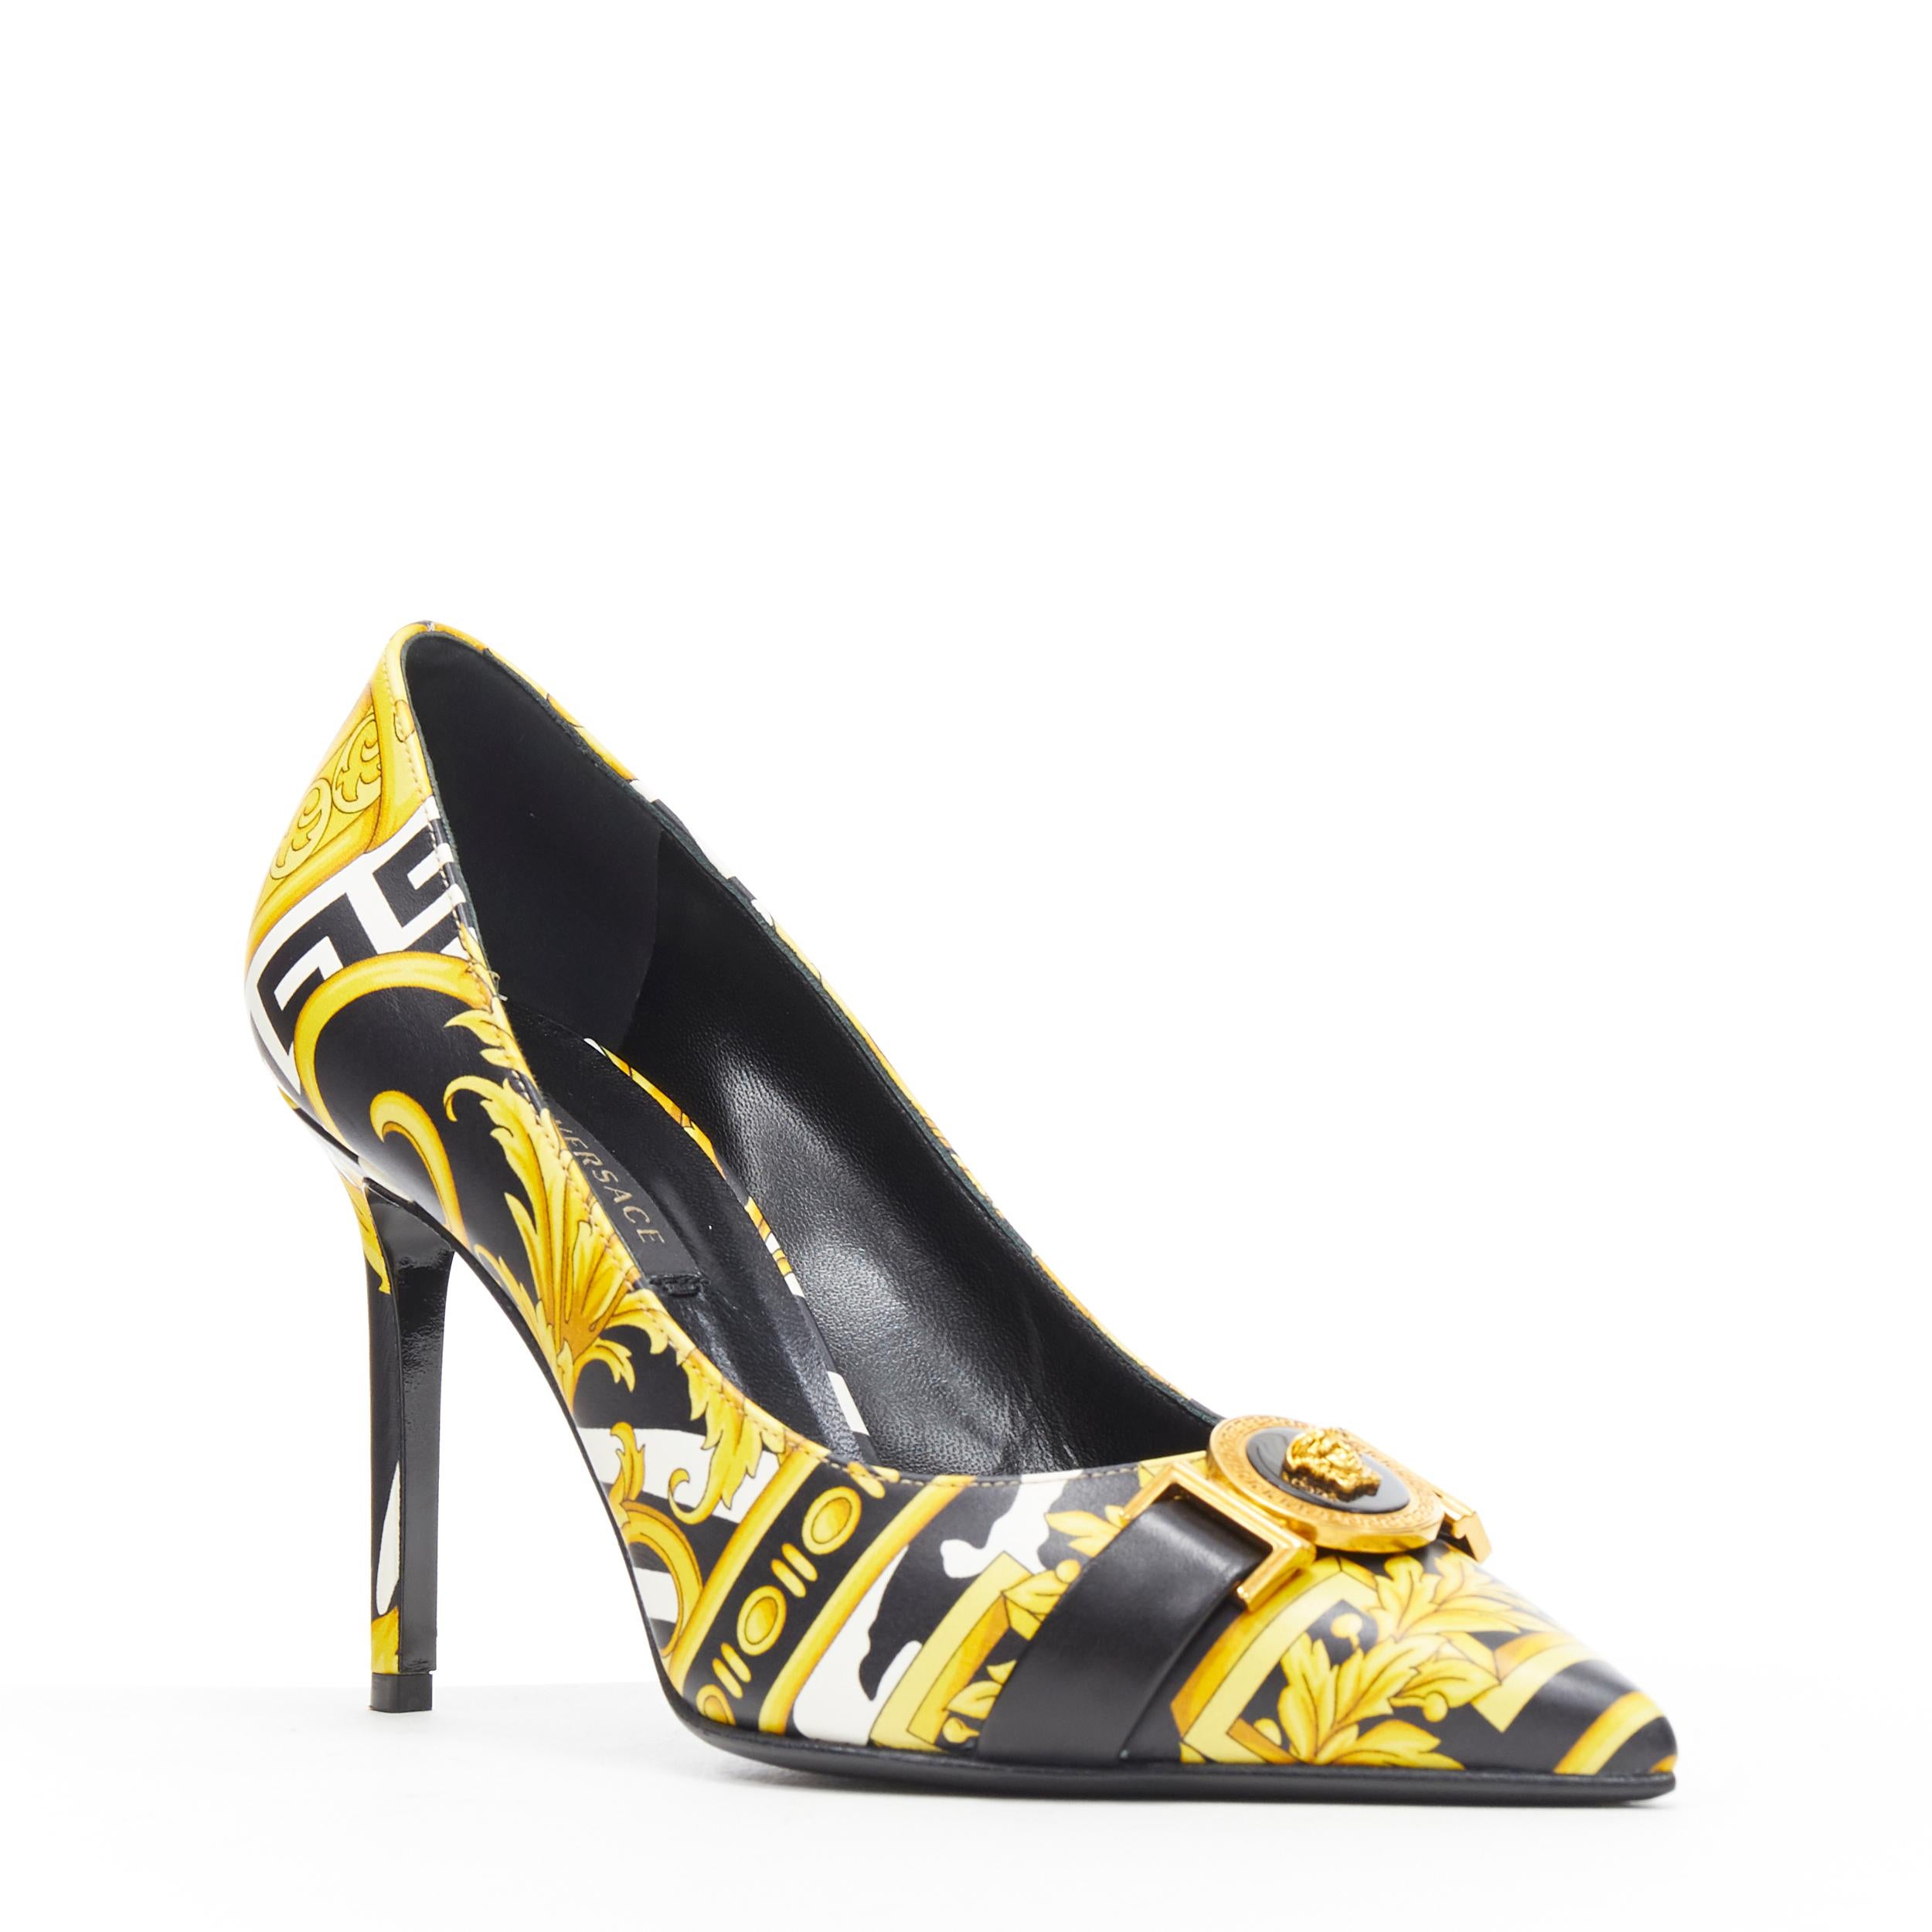 new VERSACE Savage Barocco zebra greca Medusa strap pointy leather heel EU38
Brand: Versace
Designer: Donatella Versace
Collection: 2019
Model Name / Style: Baroque pump
Material: Leather
Color: Gold, black
Pattern: Floral
Extra Detail: Savage